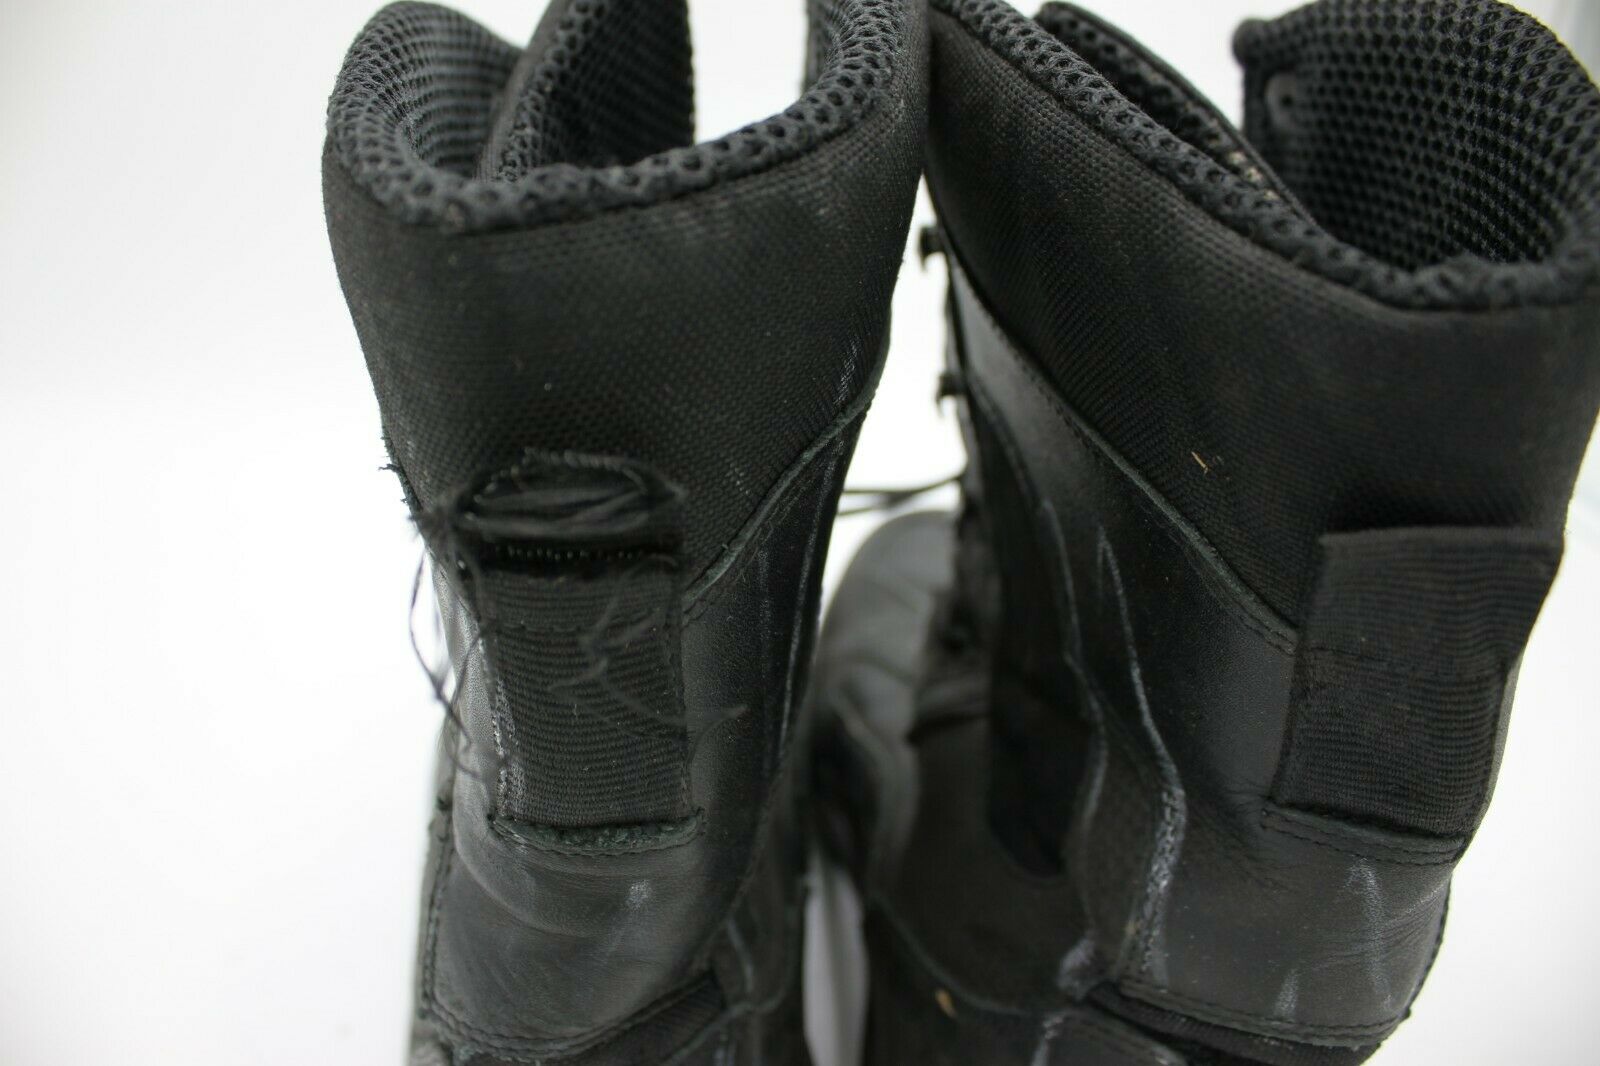 Austrian Military Jungle Combat Boots Stumpp & Baier Lightweight Used Size 10 US (ASB310)